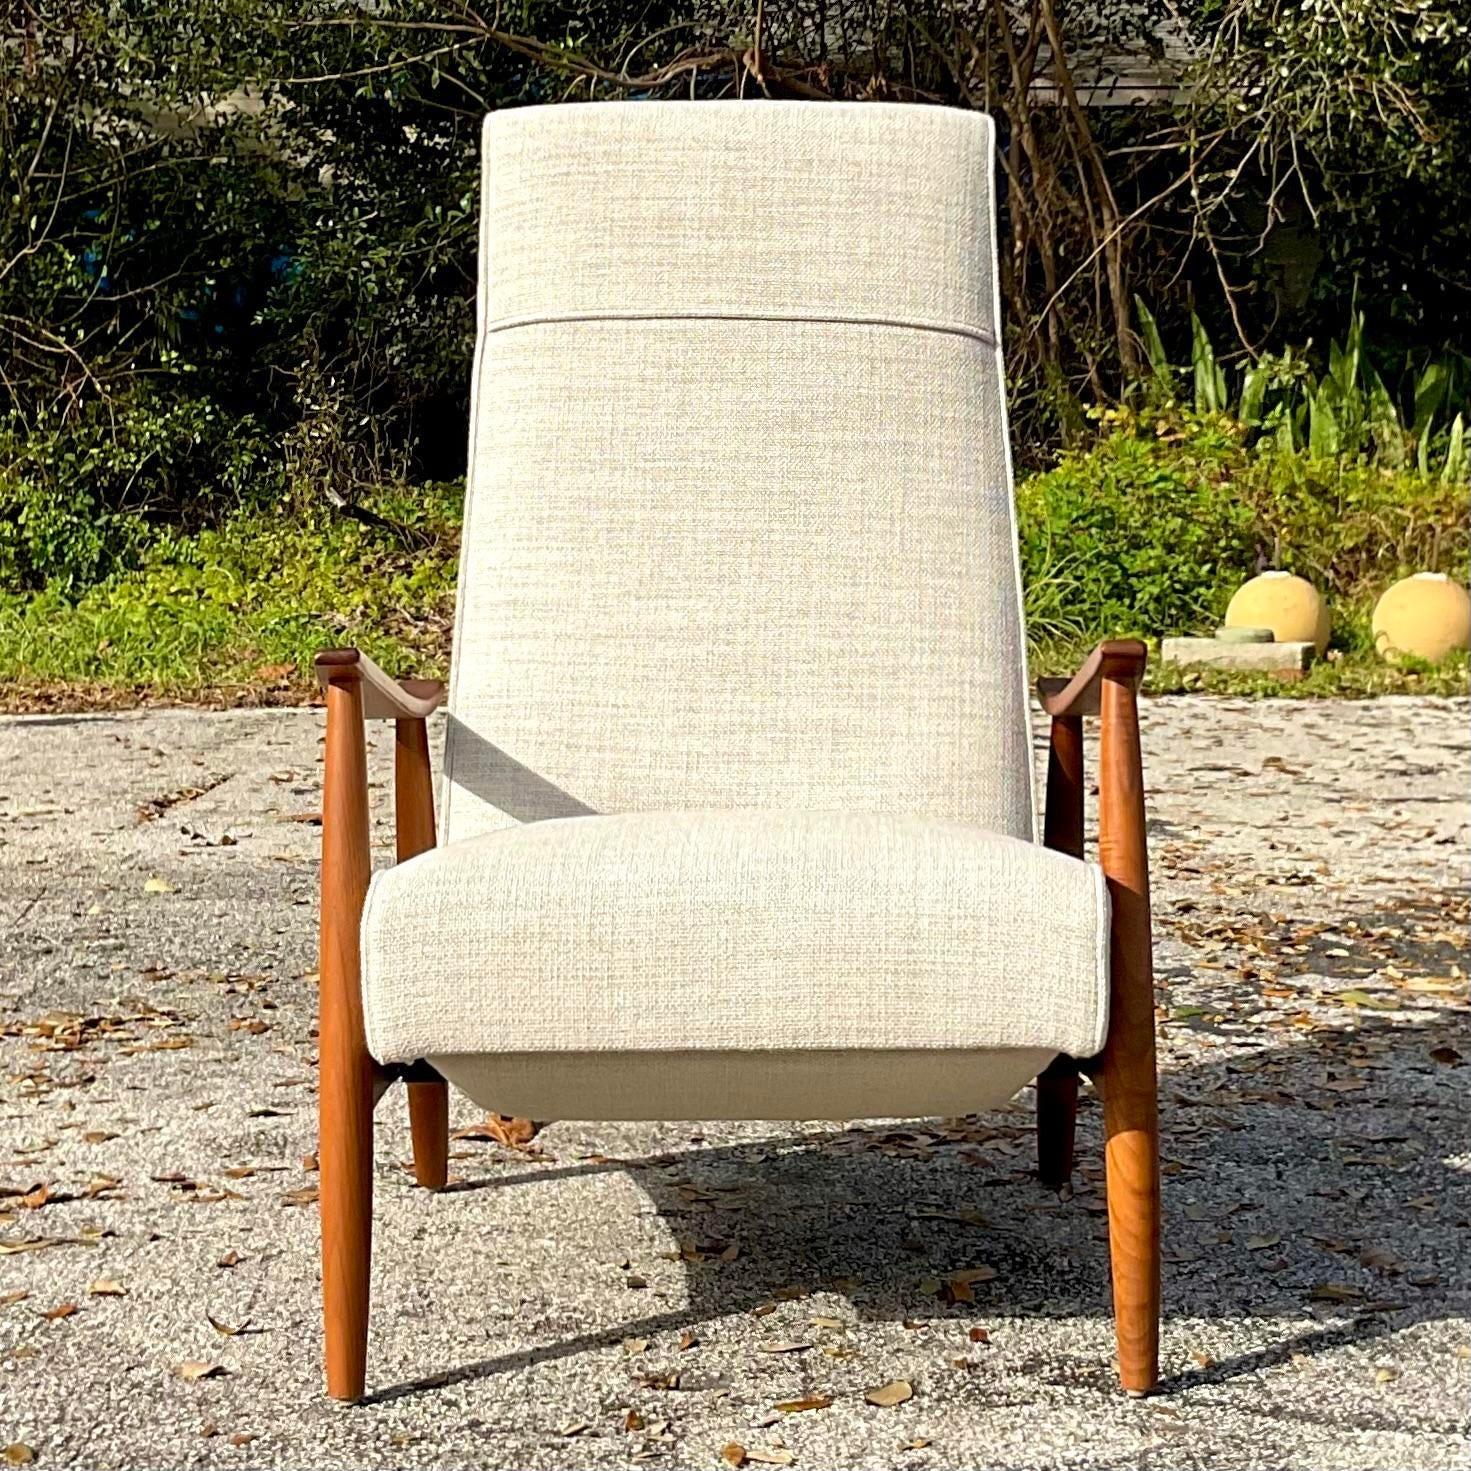 Vintage Boho Milo Baughman for Thayer Coggin Reclining Lounge Chair For Sale 1